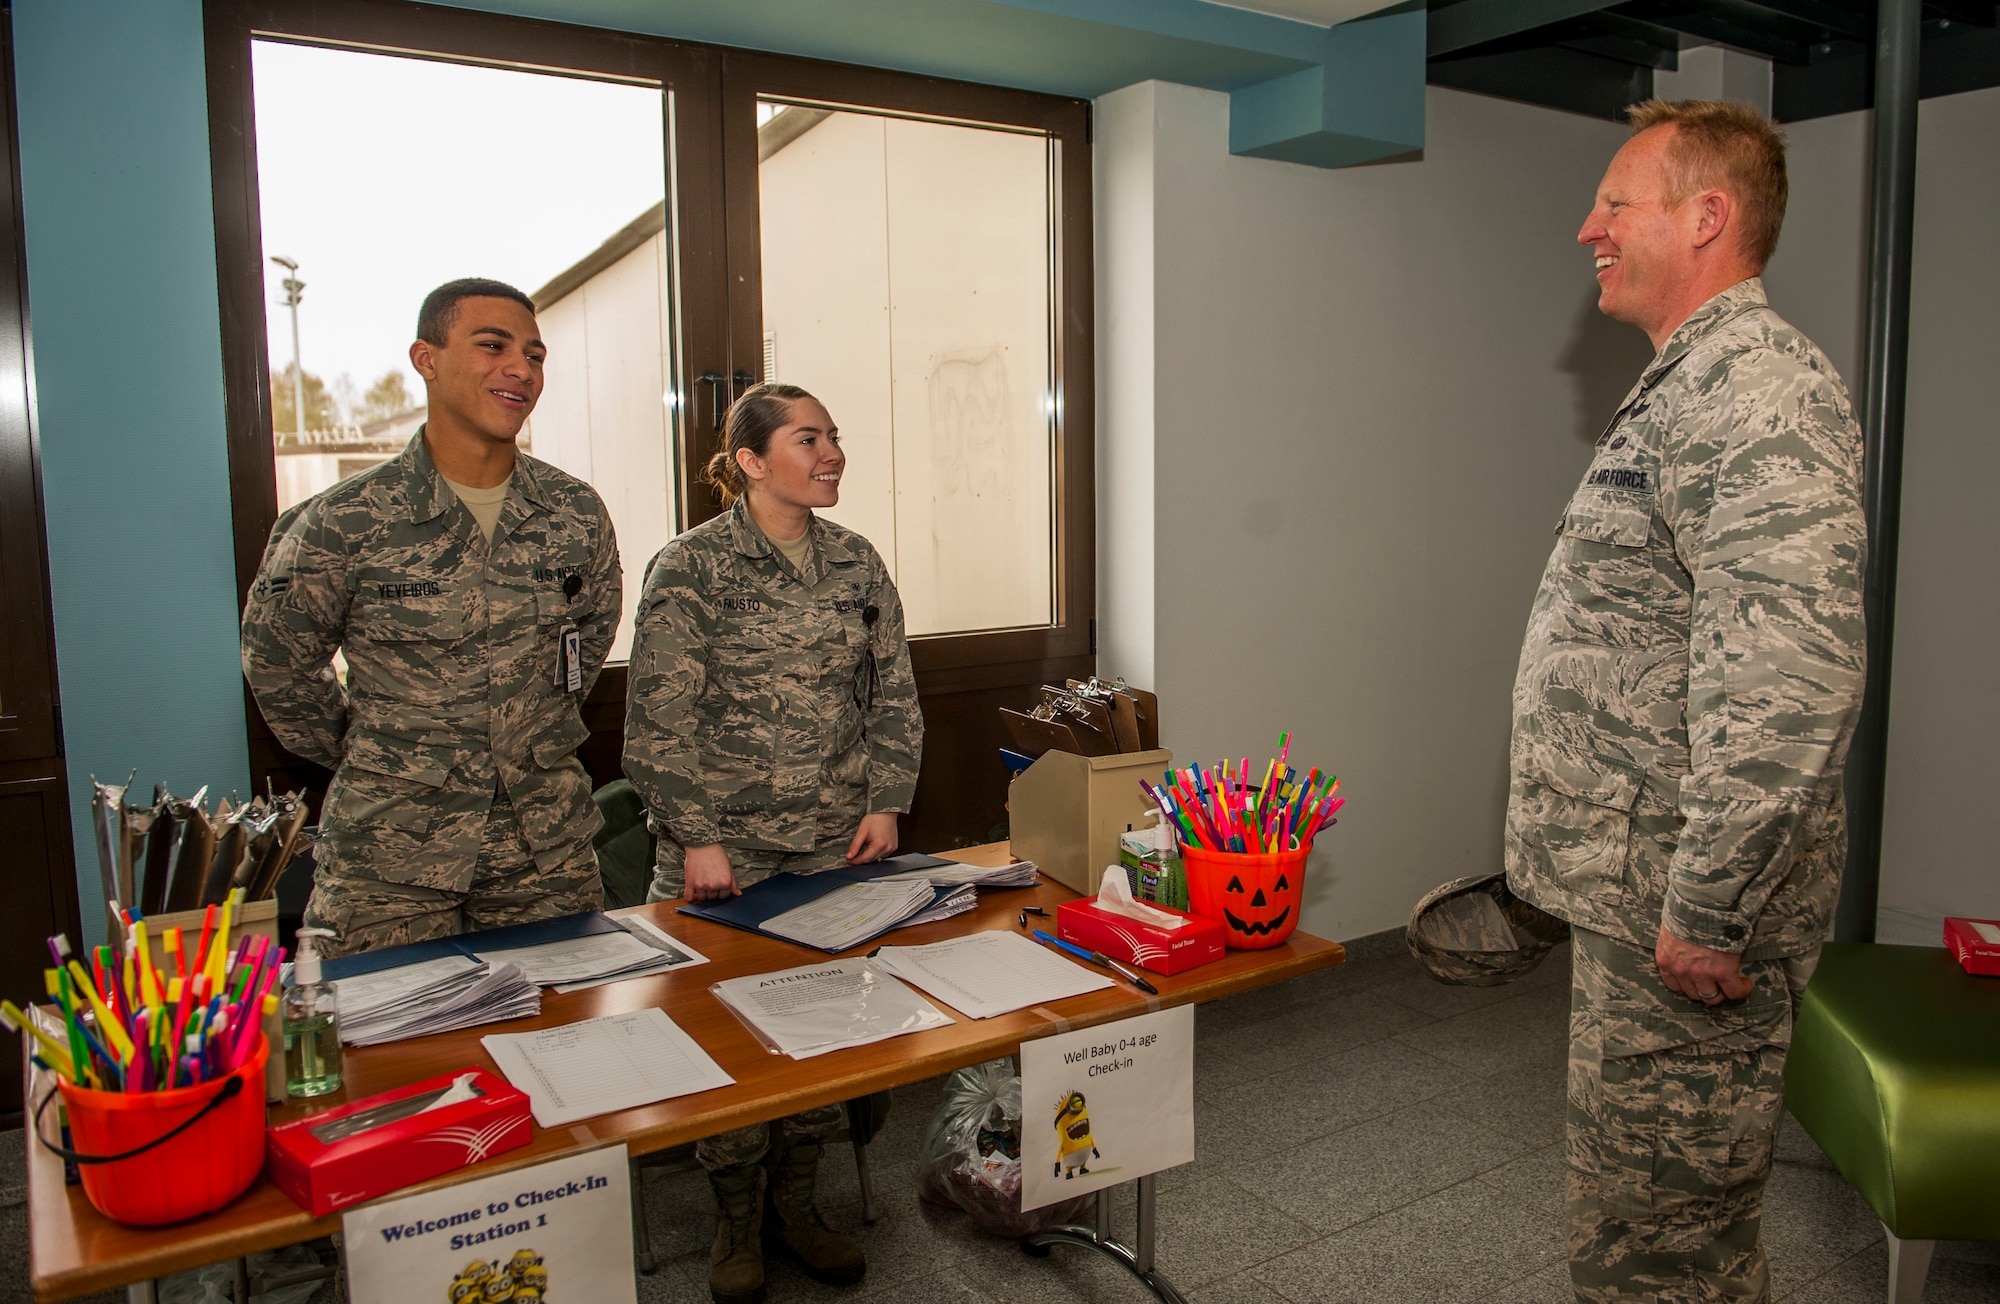 U.S. Air Force Col. Joe McFall, 52nd Fighter Wing commander, right, speaks with U.S. Air Force Airman 1st Class Malik Veveiros, left, and U.S. Air Force Airman Davina Fausto, both 52nd Dental Squadron dental assistants, during the dental clinic’s semi-annual children’s walk-in at Spangdahlem Air Base, Germany, April 22, 2016. The dental clinic processed children from all age groups to ensure 52nd Fighter Wing family members were received proper the dental care. (U.S. Air Force photo by Airman 1st Class Timothy Kim/Released)